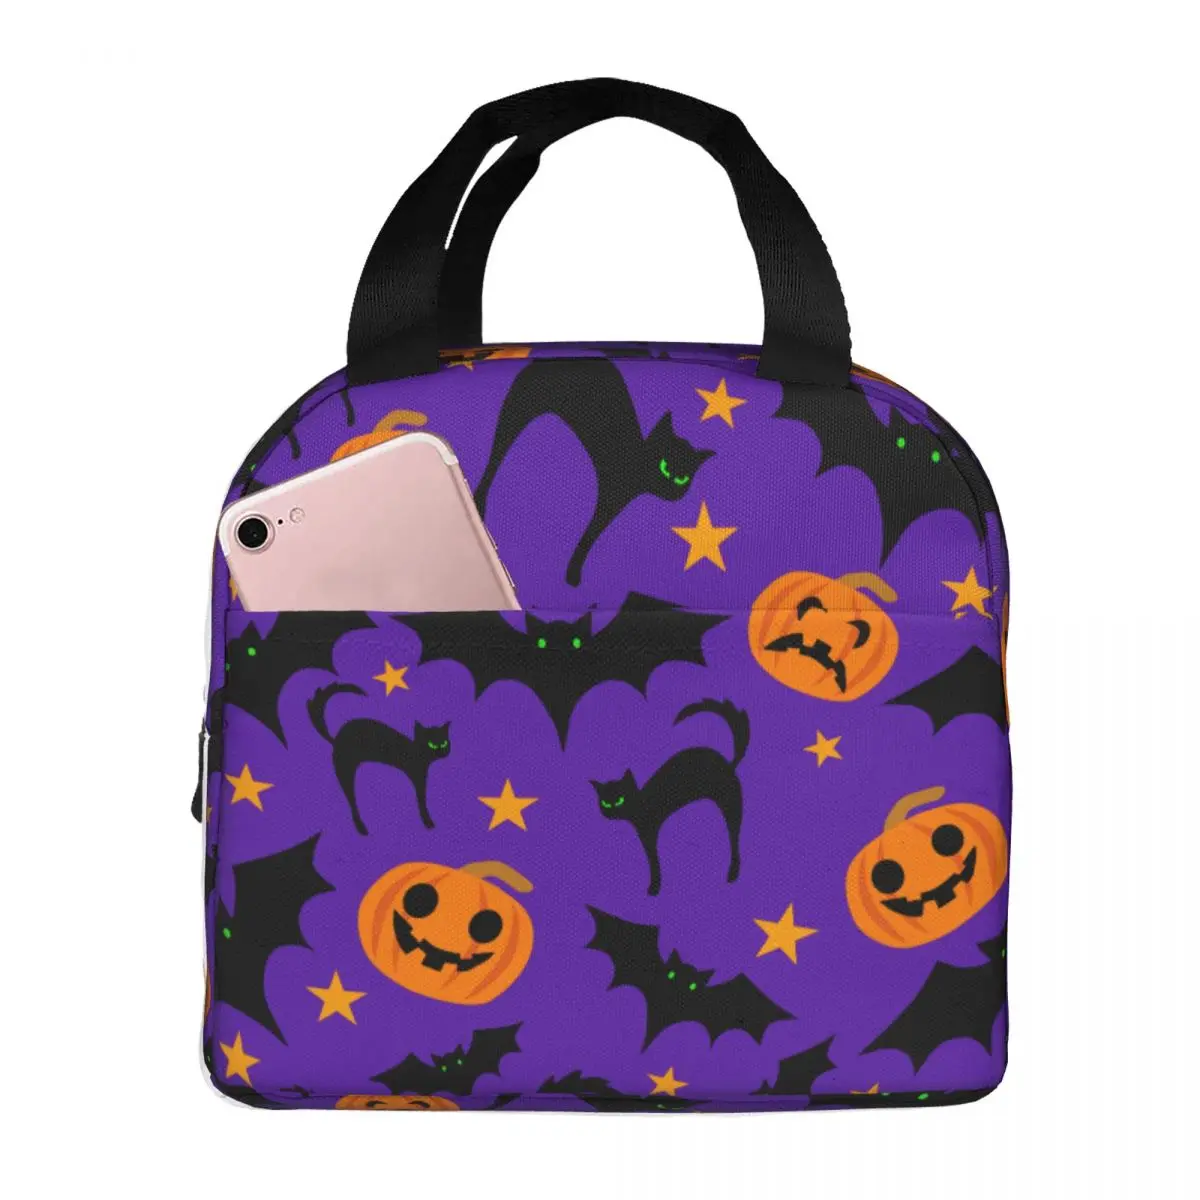 Lunch Bag for Women Kids Halloween Pumpkins Bats Witch Cats Thermal Cooler Bags Portable Picnic Work Canvas Tote Bento Pouch